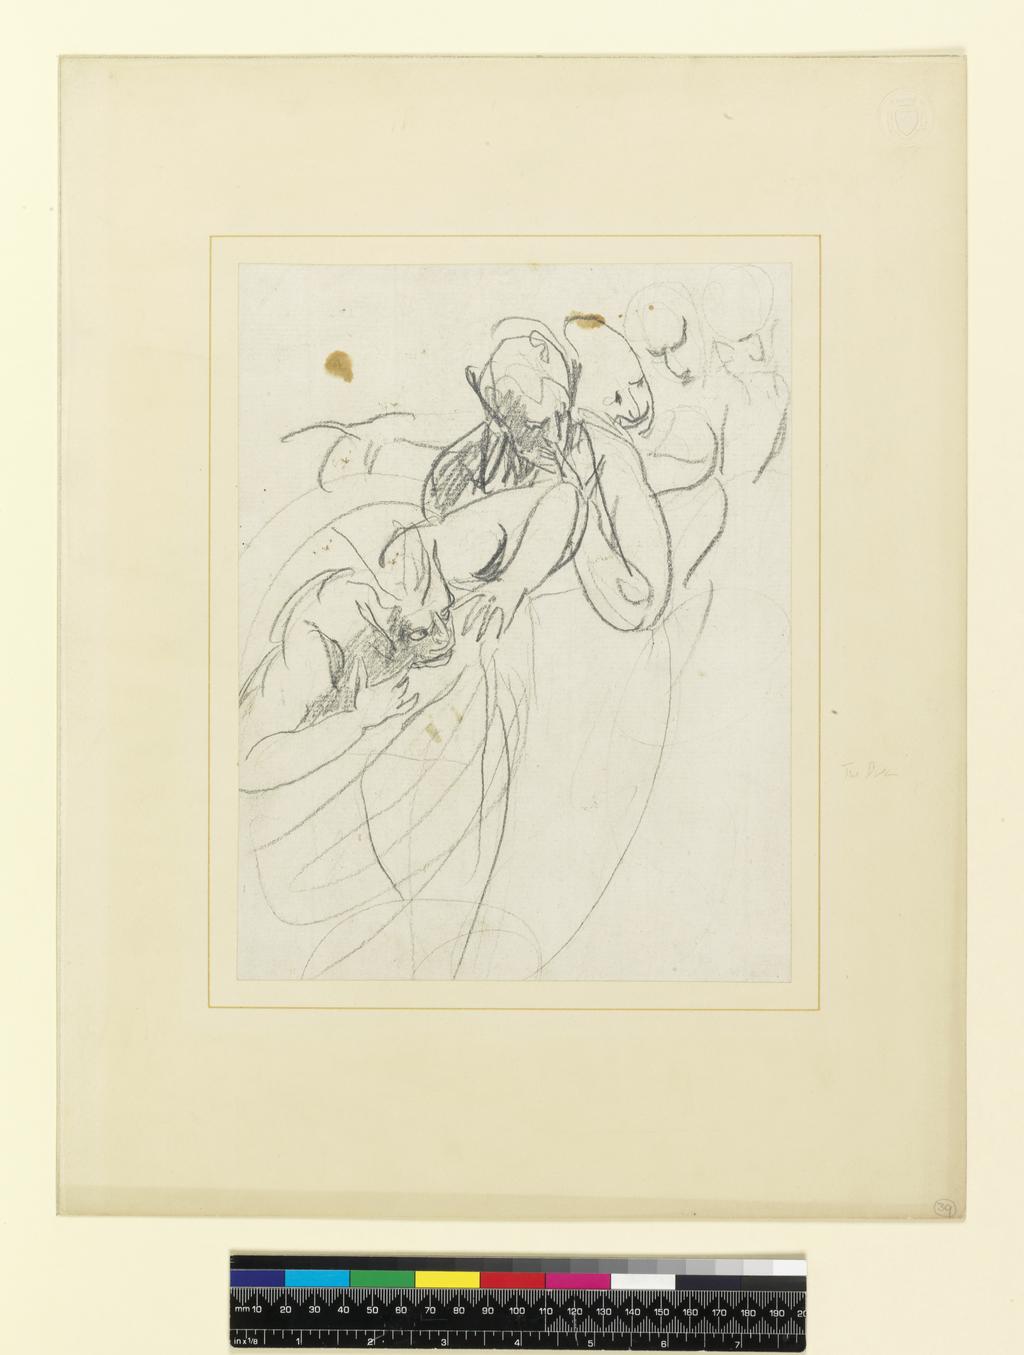 An image of Fairies from 'Midsummer Night's Dream'. Romney, George (British, 1734-1802). Graphite on paper, laid down on mount, height 249 mm, width 192 mm, circa 1790-1792.